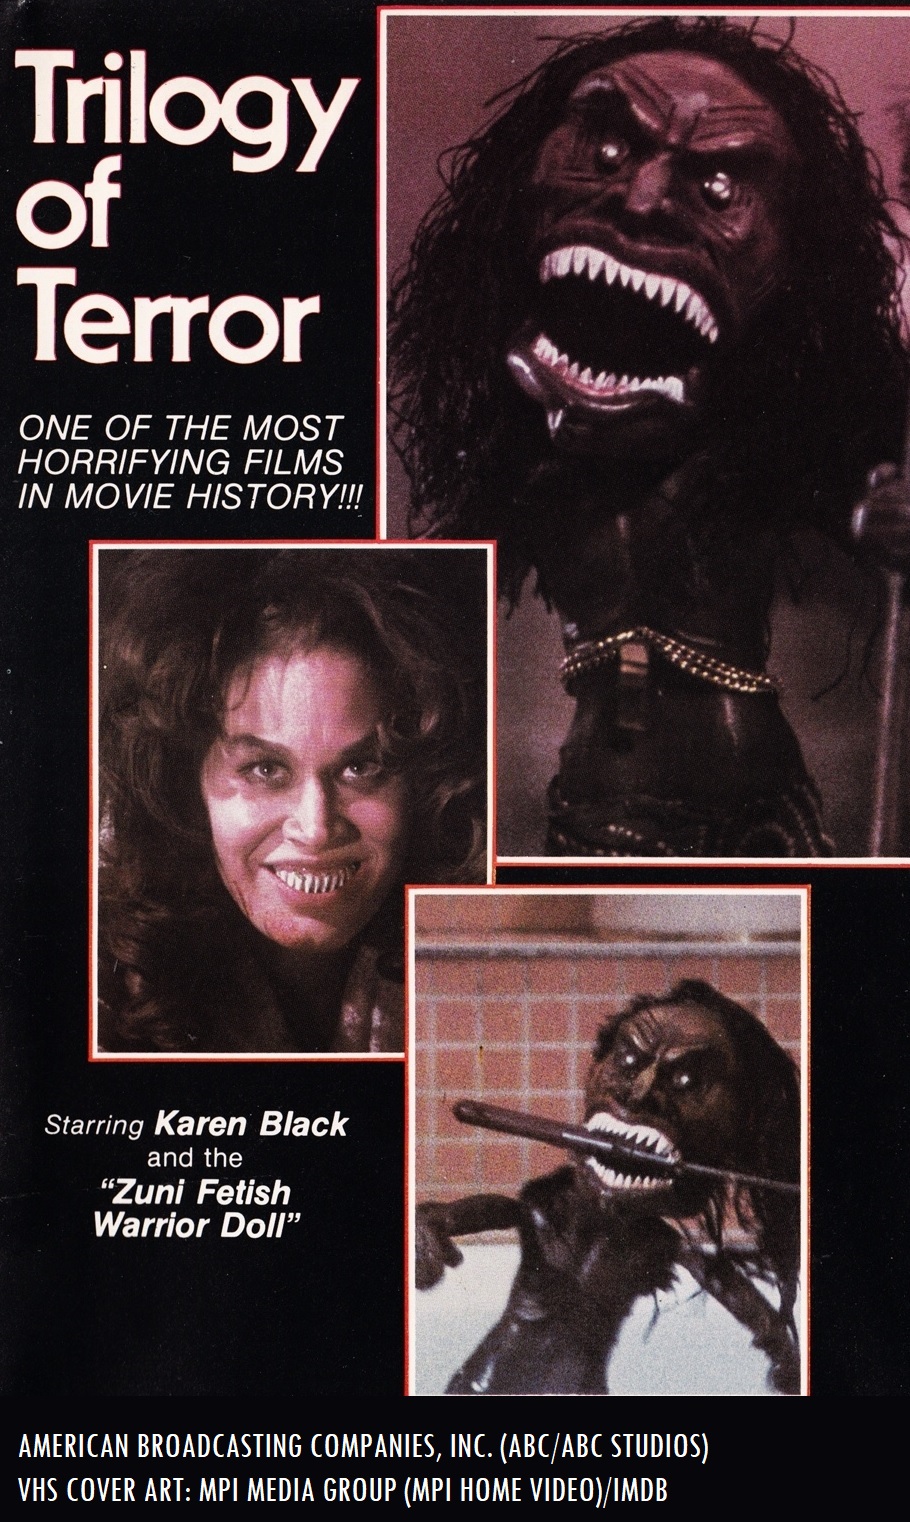 1980s_MPI_VHS_Cover_Art_Trilogy_Of_Terror_1975_ABC